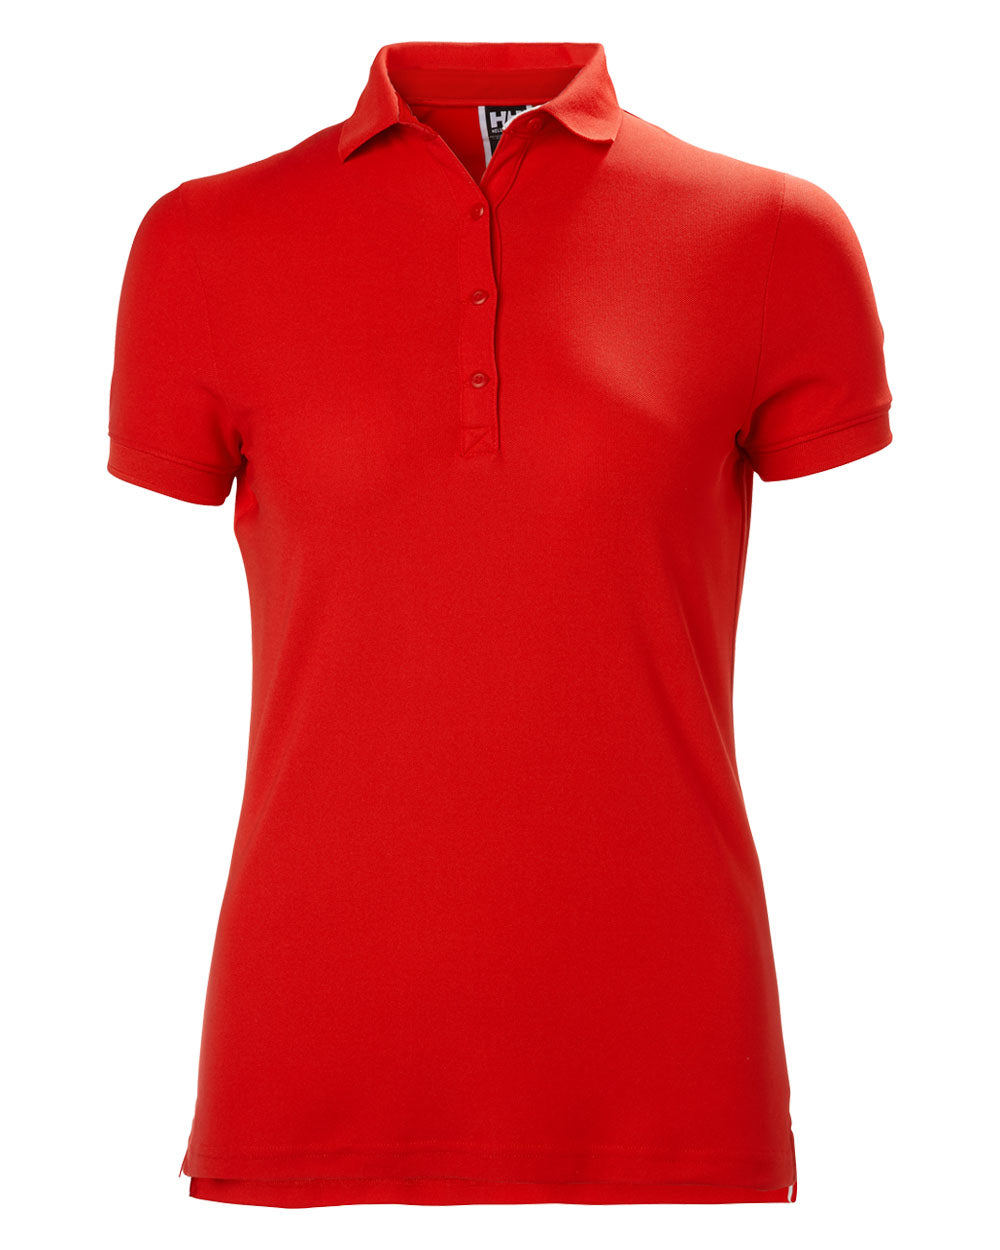 Flag Red coloured Helly Hansen Womens Polo on White background 